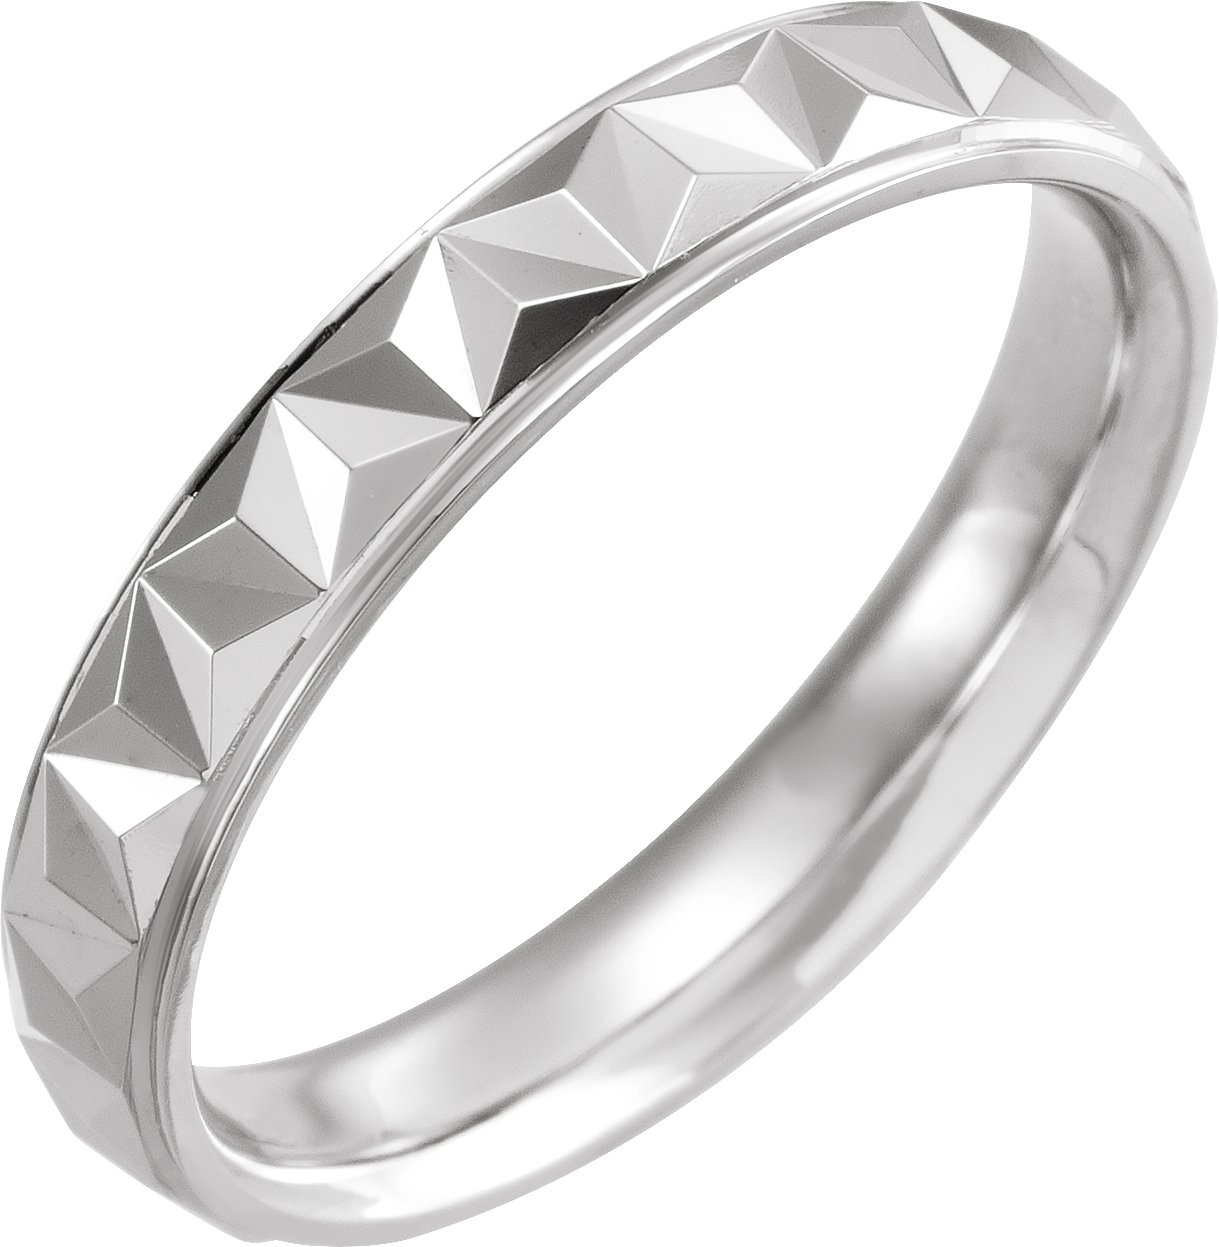 Sterling Silver 4 mm Geometric Band with Polished Finish Size 11